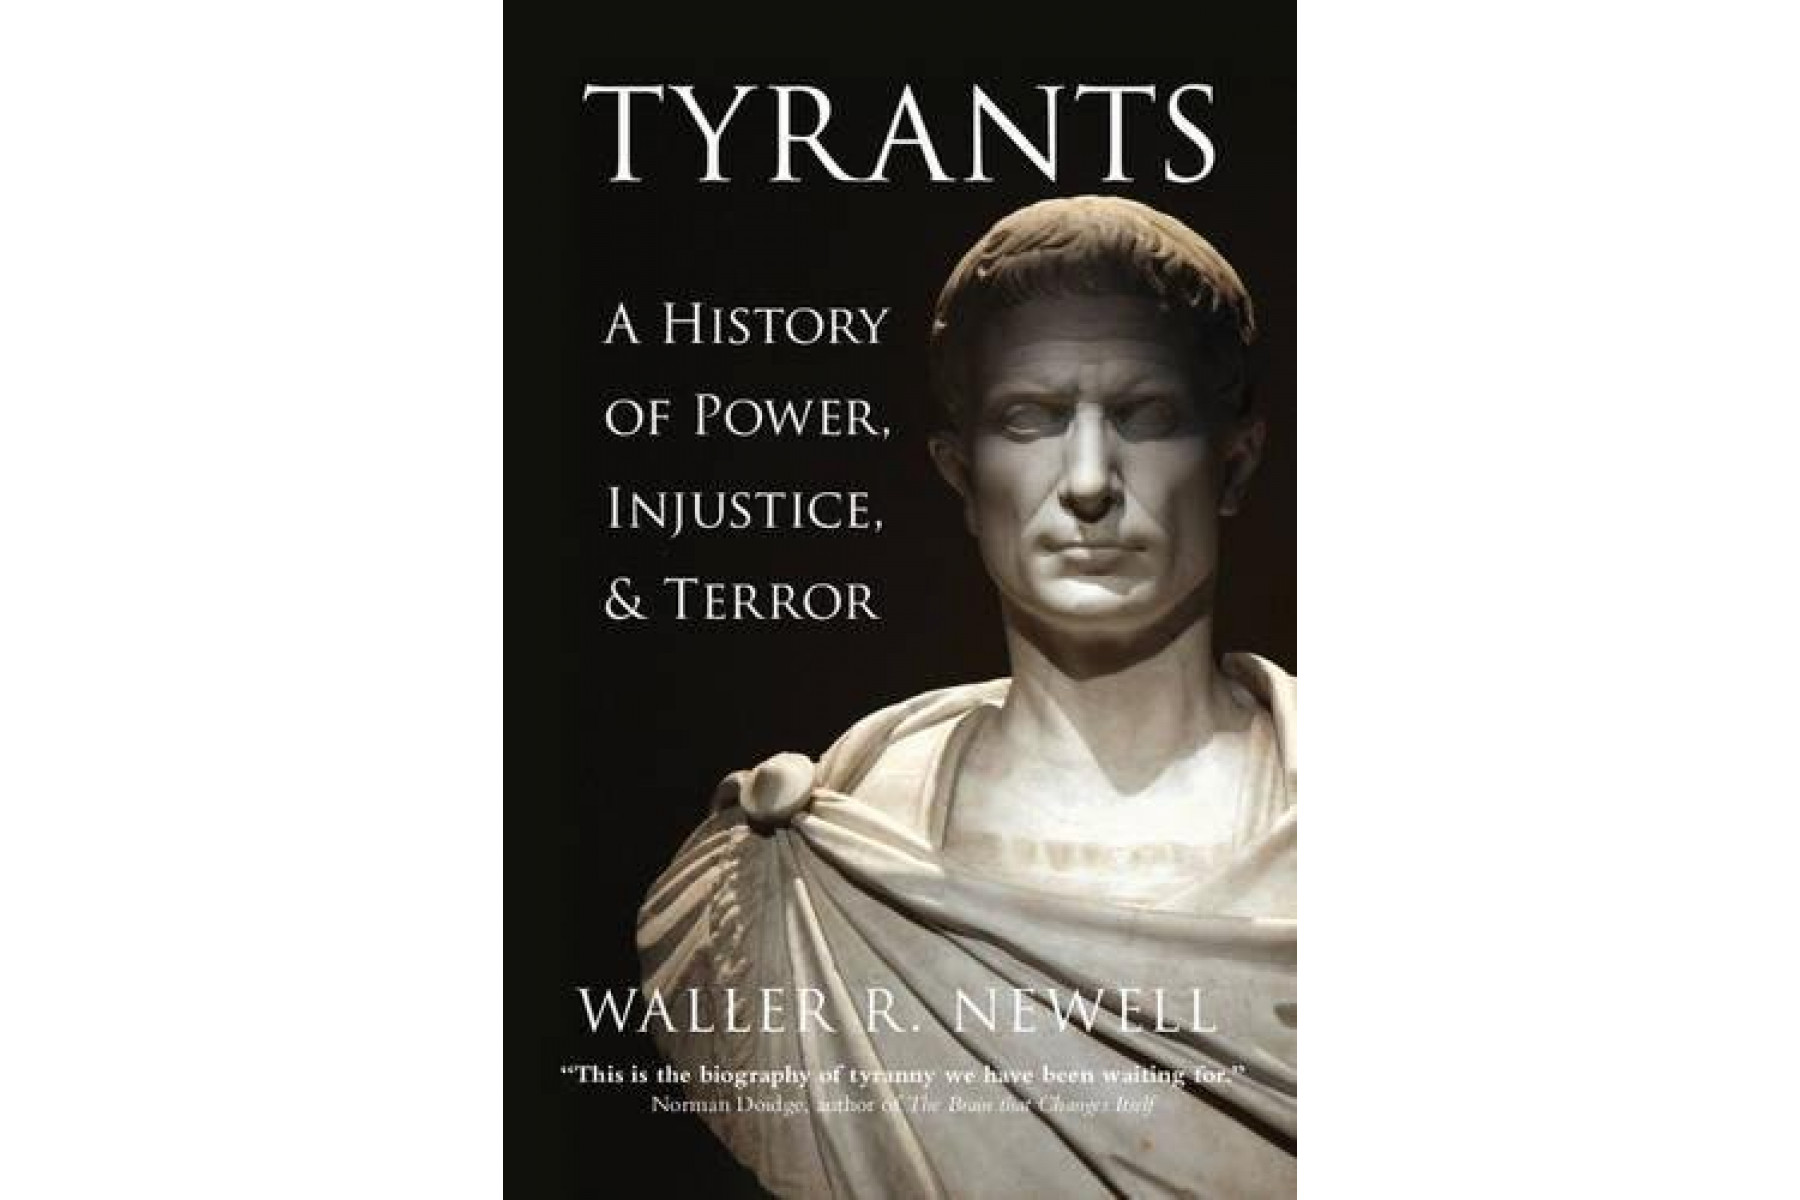 Tyrants: A History of Power, Injustice, and Terror